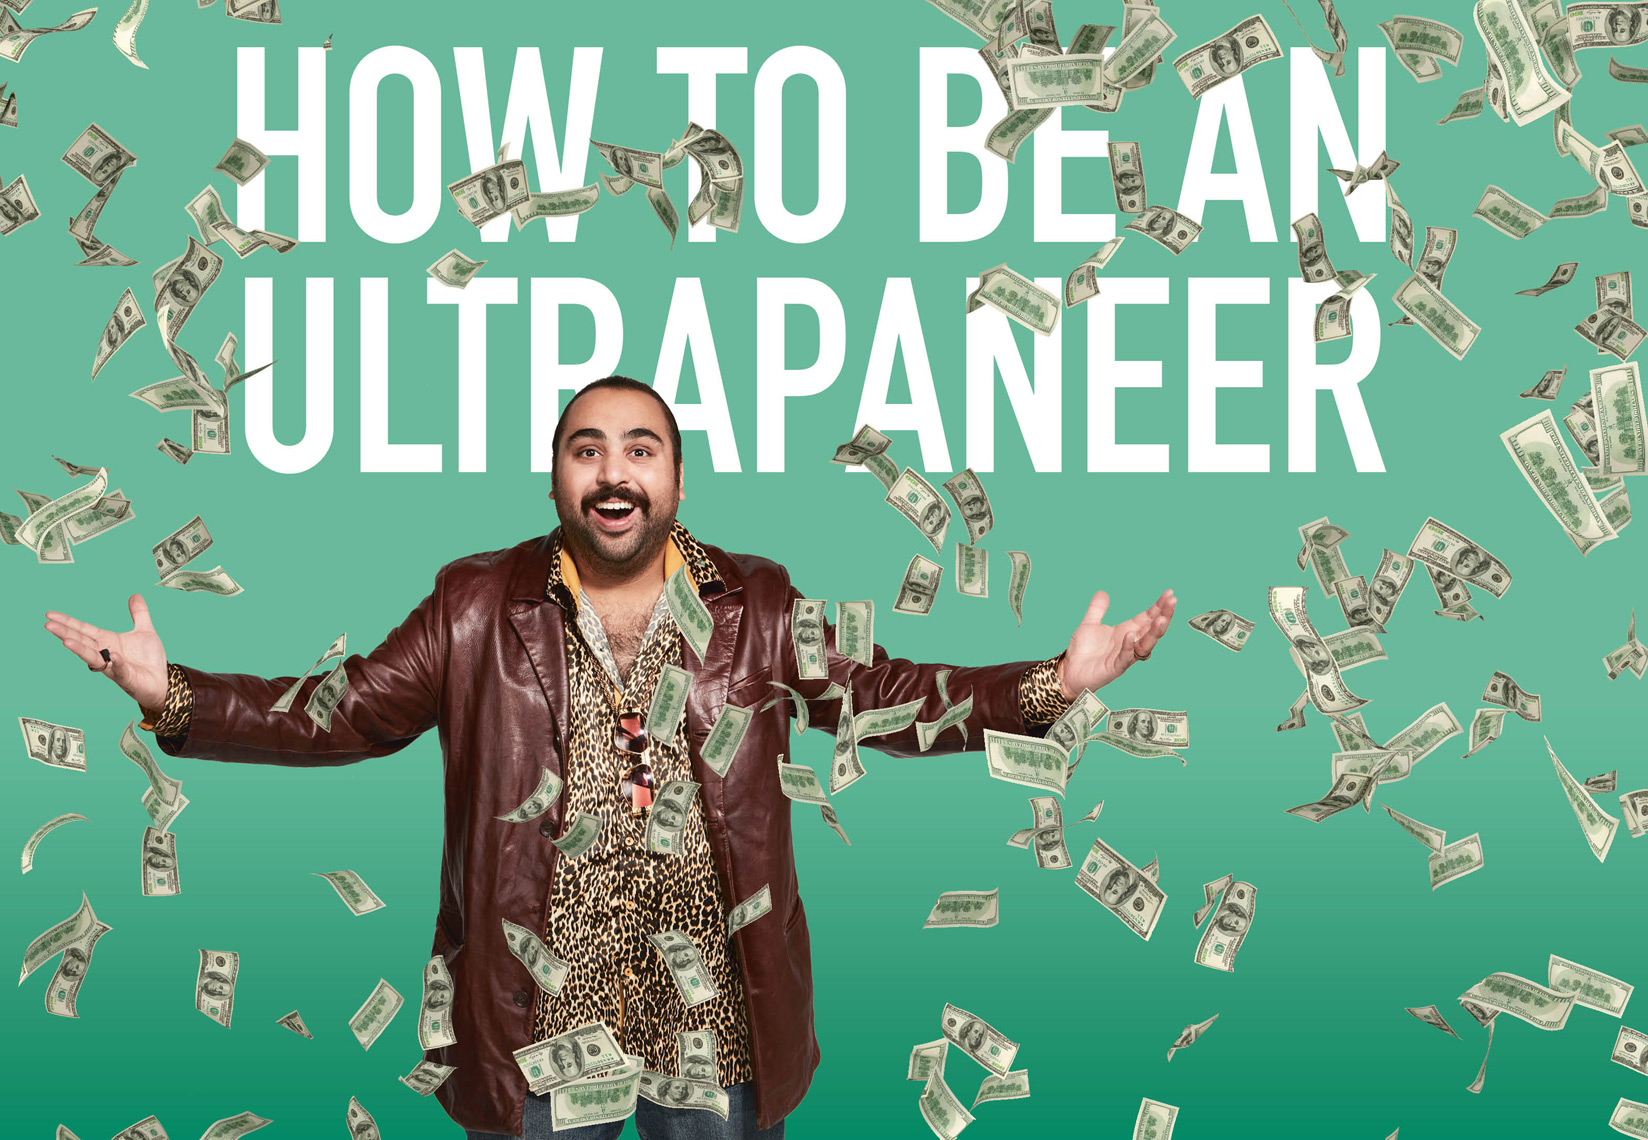 HOW TO BE A MAN Chabuddy G book cover